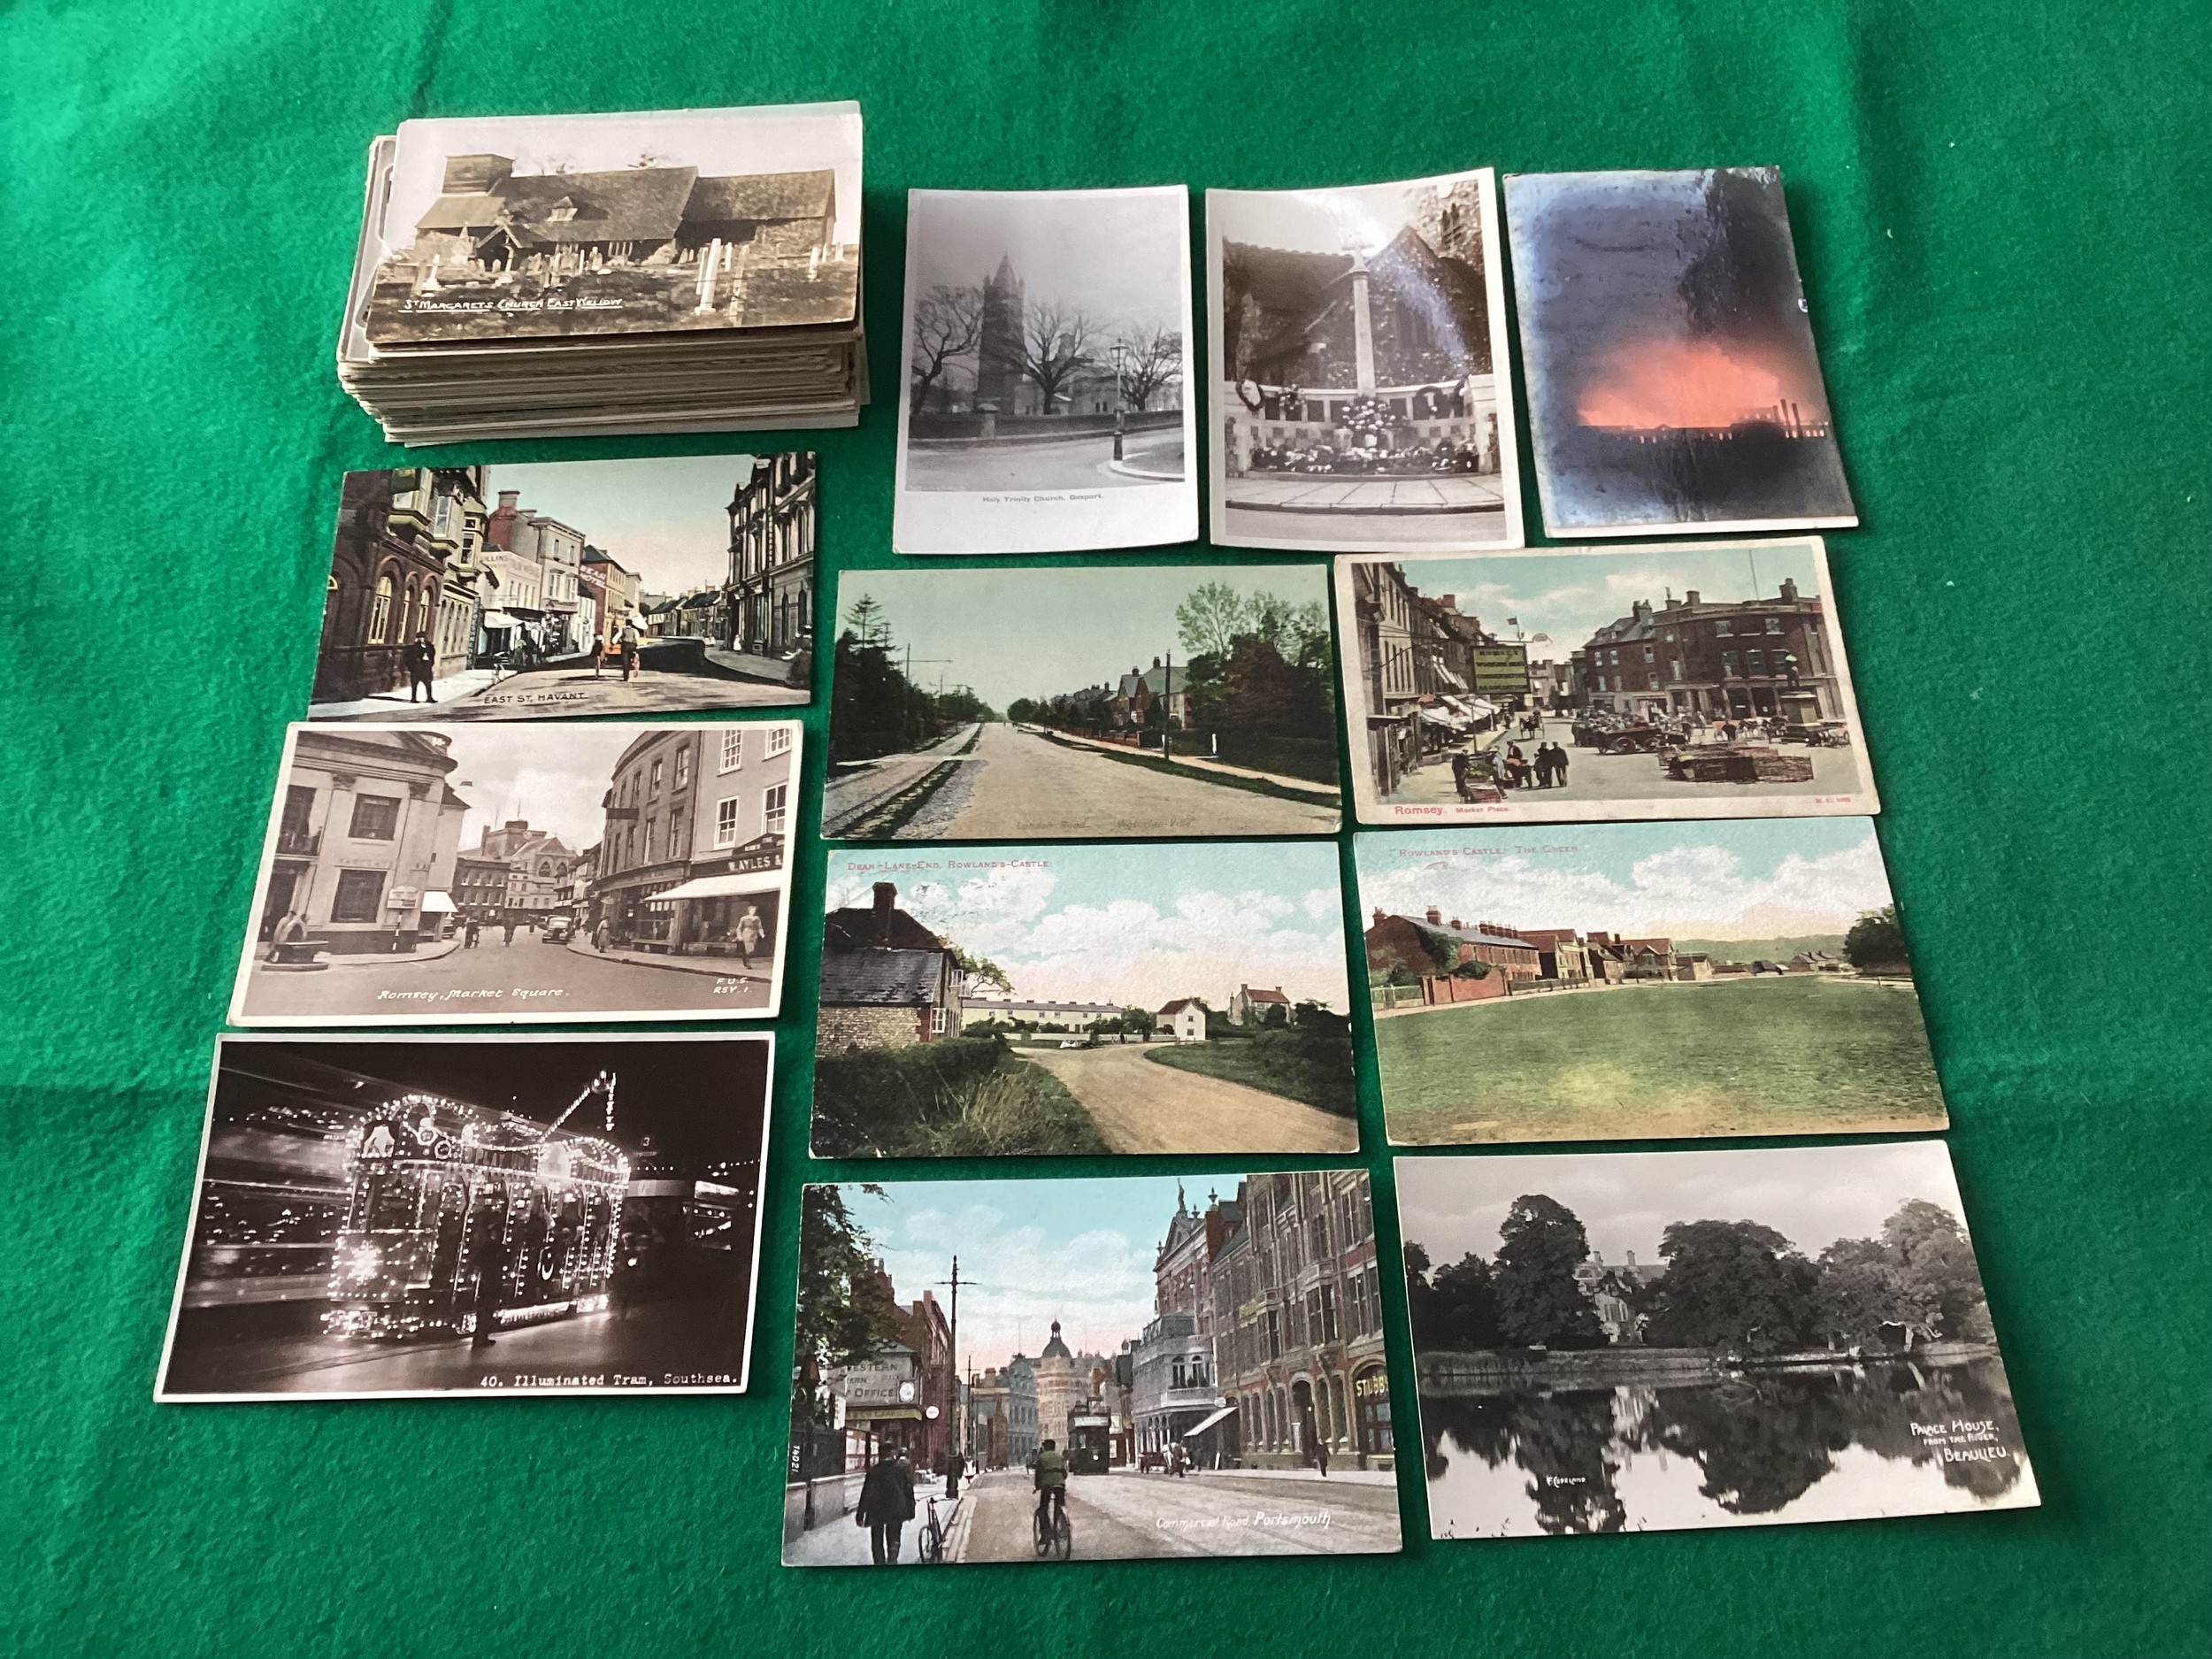 Approximately 140 cards of Hampshire, with strong interest in Portsmouth, but also cards of Havant